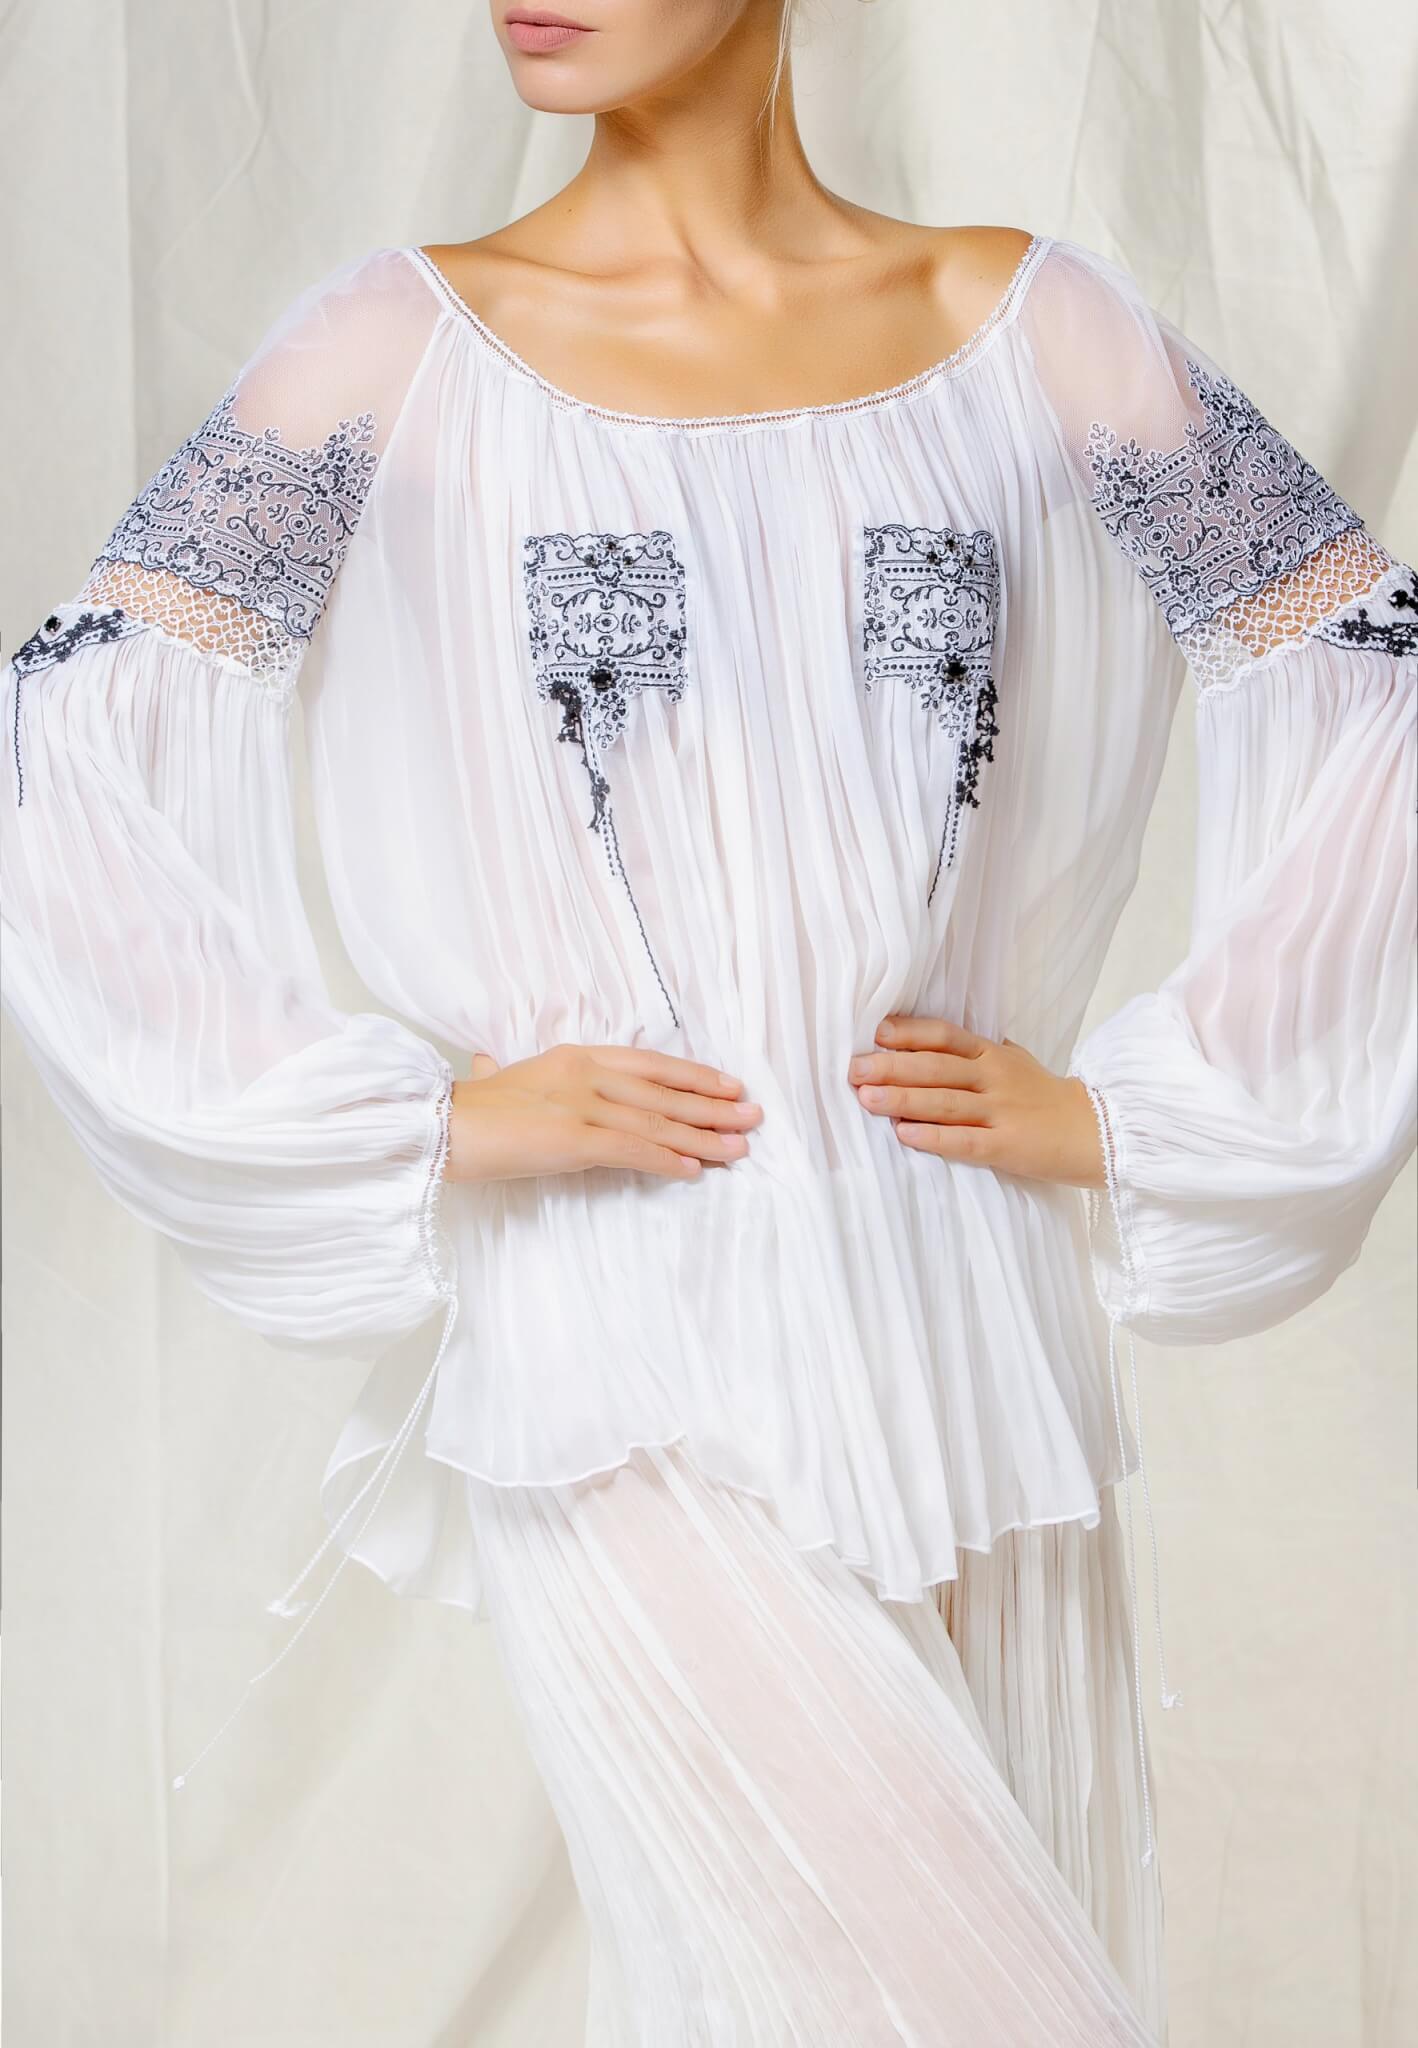 Silk blouse with lace and beads